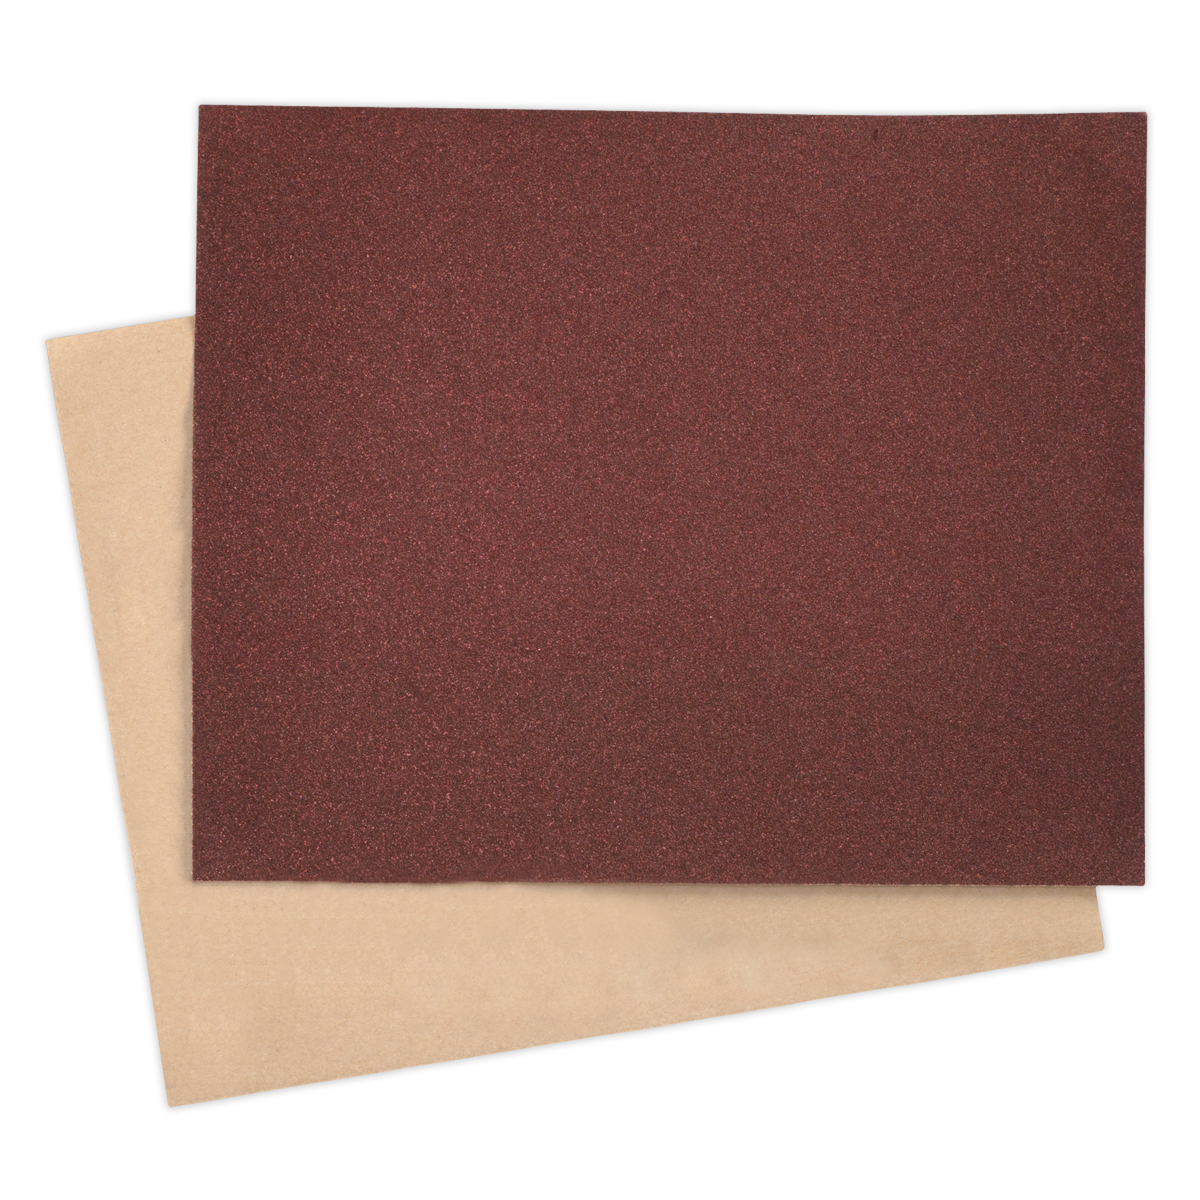 Production Paper 230 x 280mm 80Grit Pack of 25 - PP232880 - Farming Parts